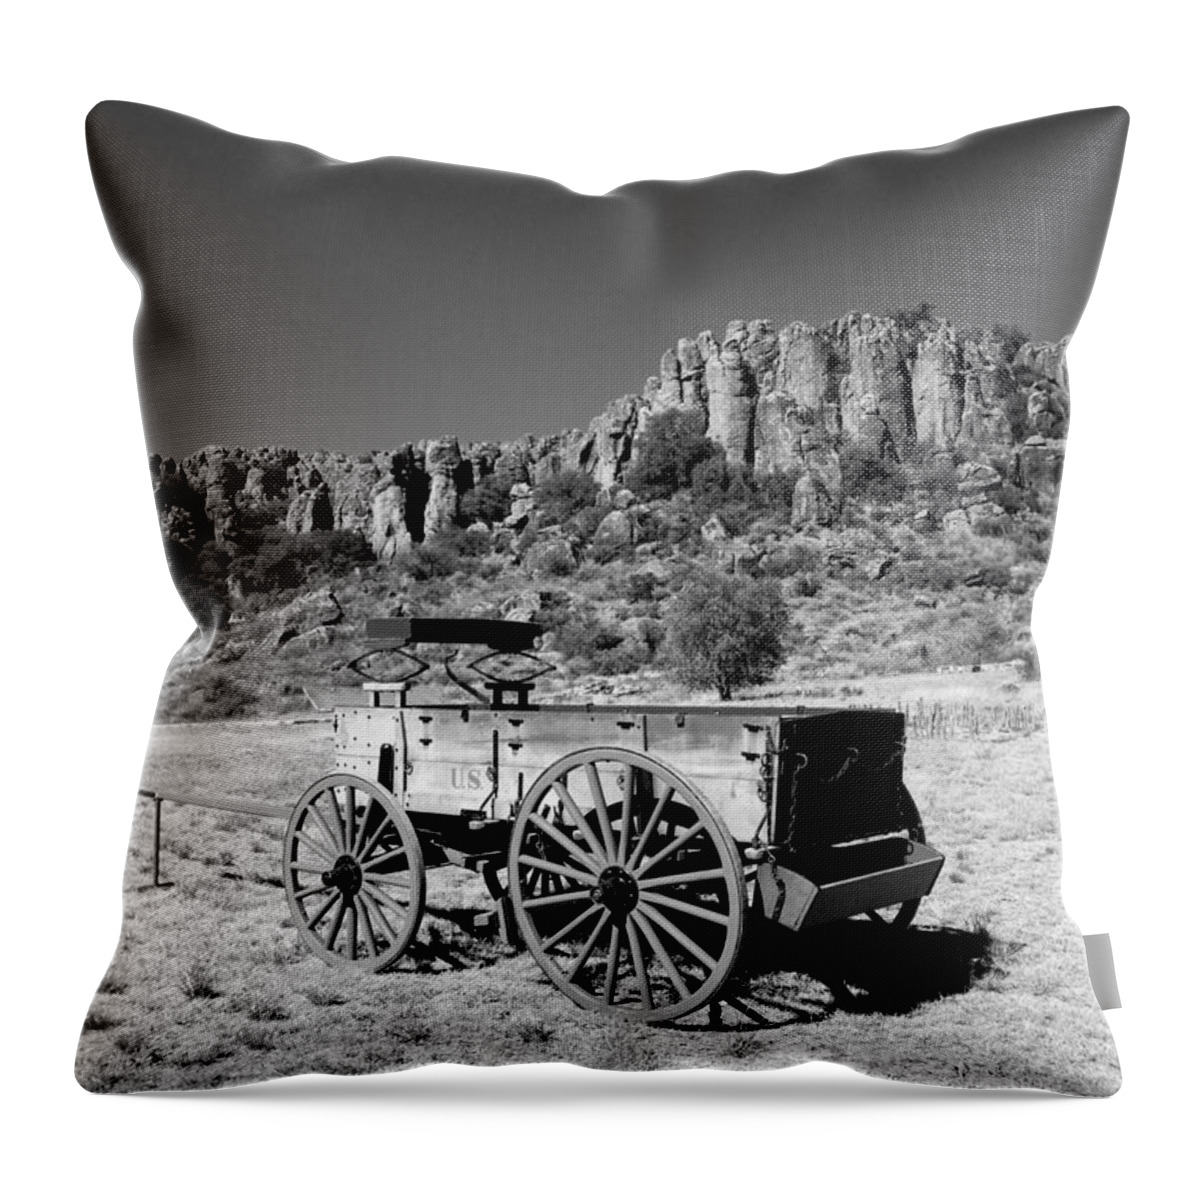 Blackandwhite Throw Pillow featuring the photograph Old West Wagon by Pam Rendall